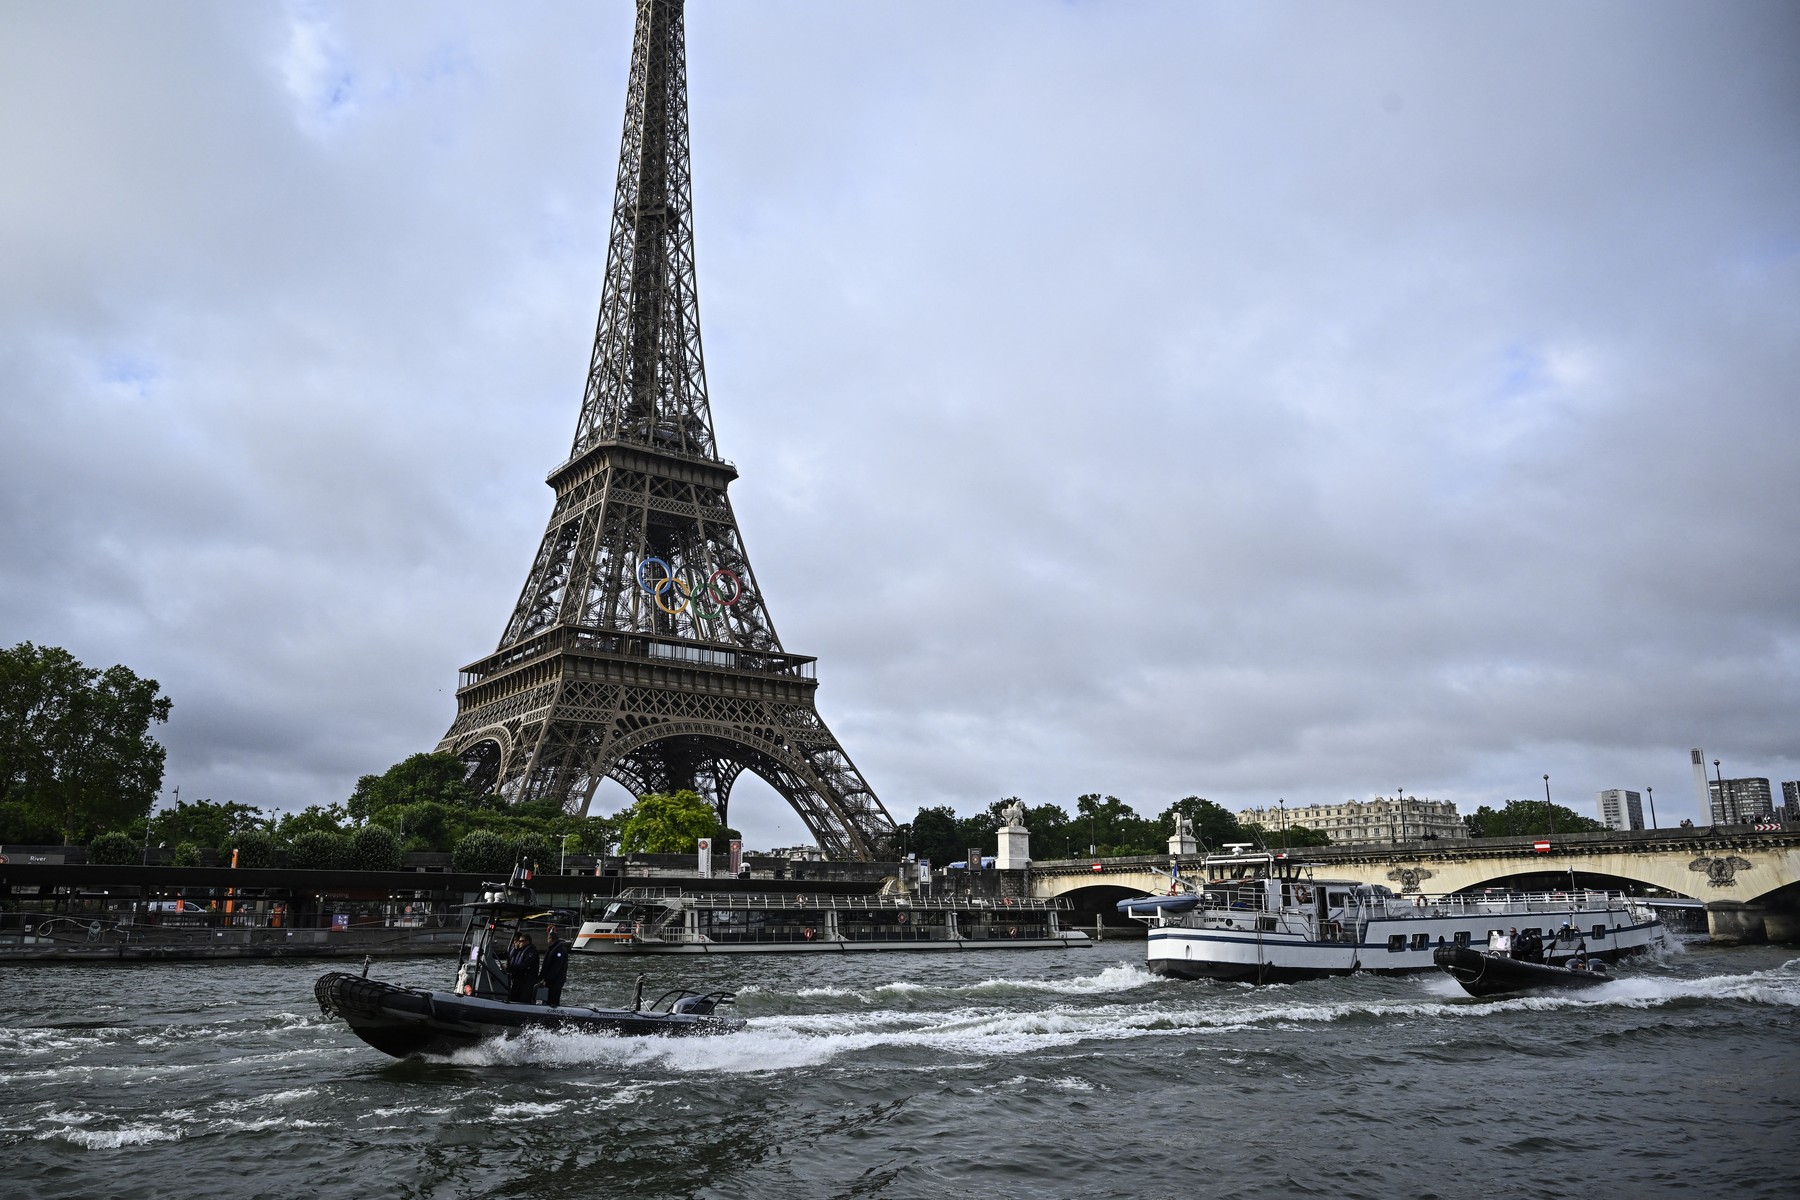 (FILES) Police boats participate in a technical navigation rehearsal on the Seine river for the opening ceremony of the Paris 2024 Olympic Games, in Paris, on June 17, 2024. The rehearsal of the opening ceremony of the Olympic Games, which was due to be held on June 24 with the entire fleet of boats, has been postponed due to the high flow of the Seine, AFP learned on June 21 from the prefecture of the Ile-de-France region.,Image: 883682607, License: Rights-managed, Restrictions: , Model Release: no, Credit line: JULIEN DE ROSA / AFP / Profimedia